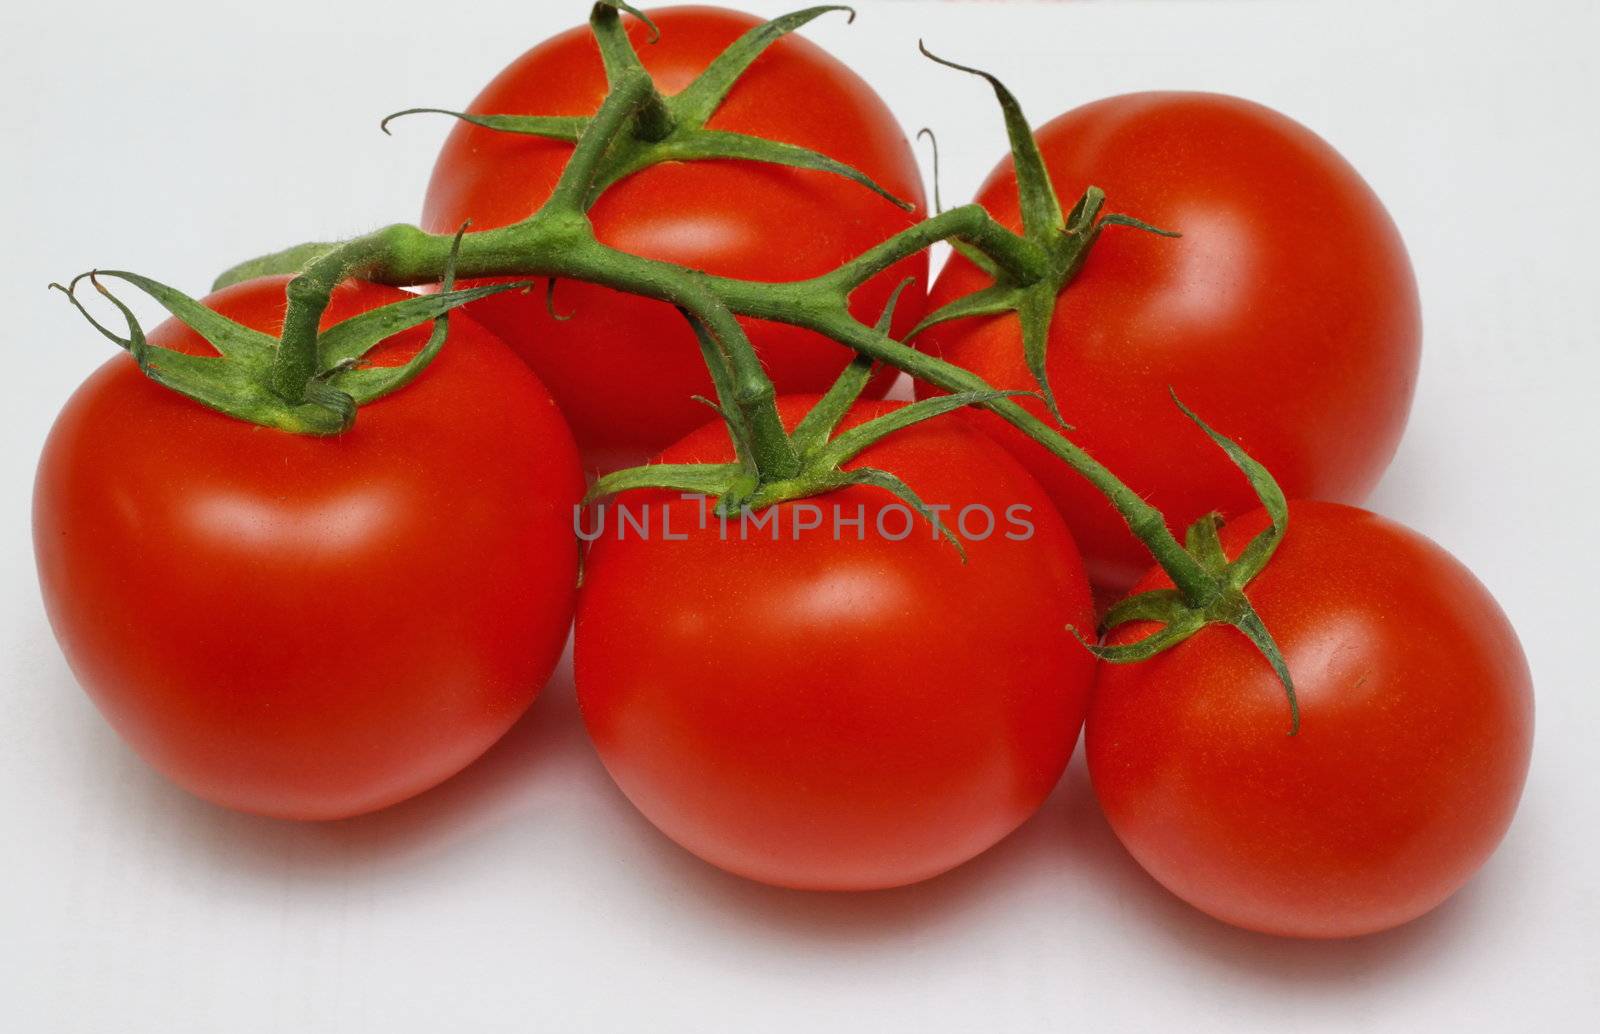 bunch of fresh vine tomatoes by leafy